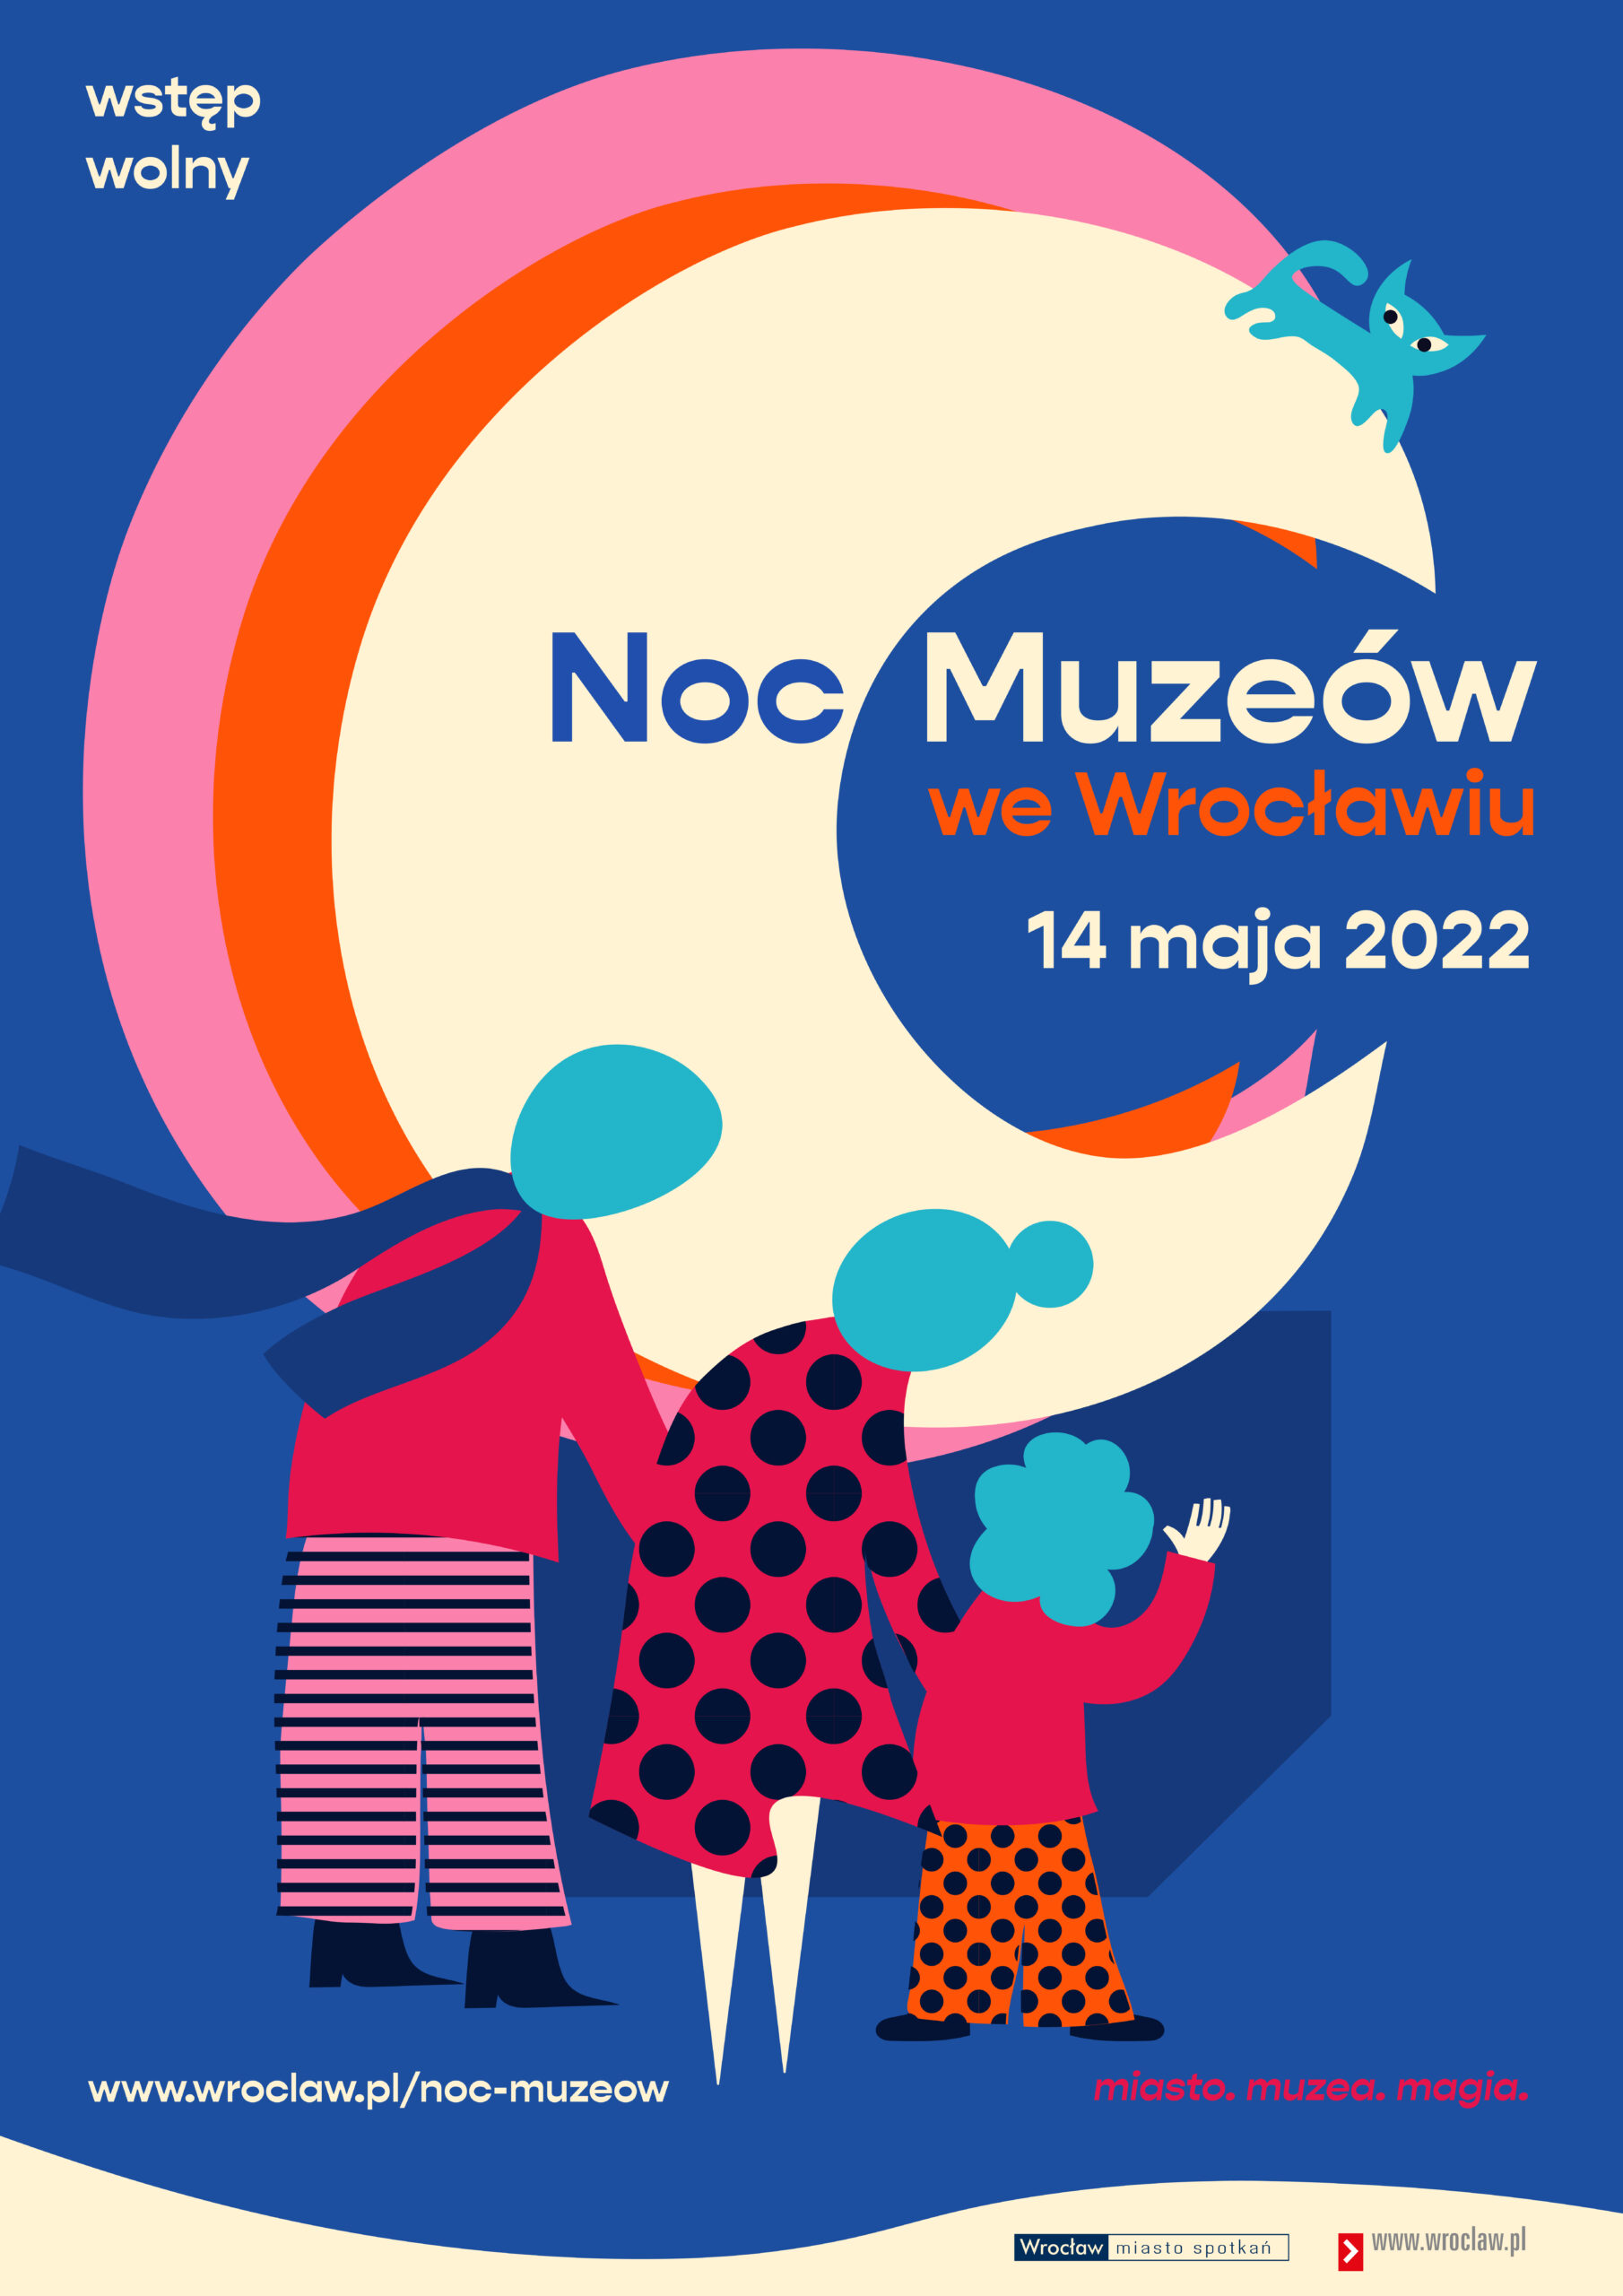 Museum Night in Wroclaw